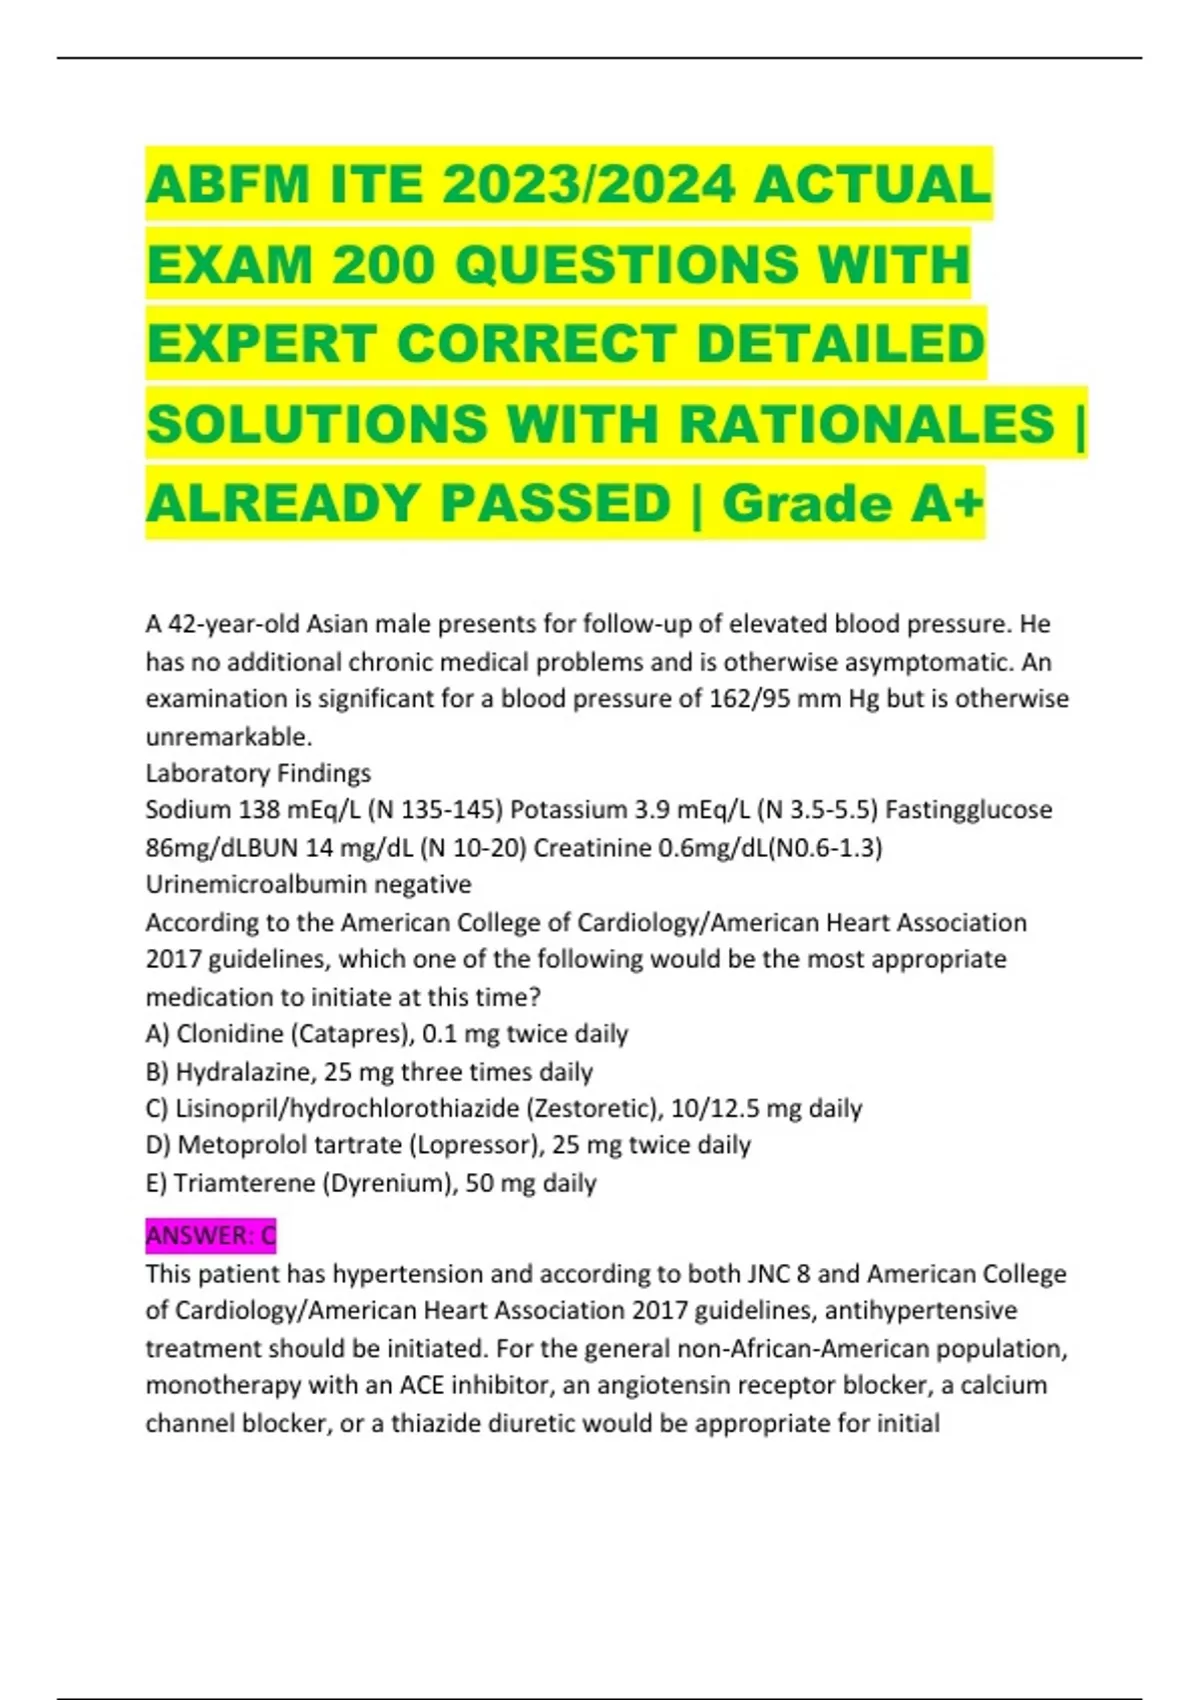 ABFM ITE 2023/2024 ACTUAL EXAM 200 QUESTIONS WITH EXPERT CORRECT